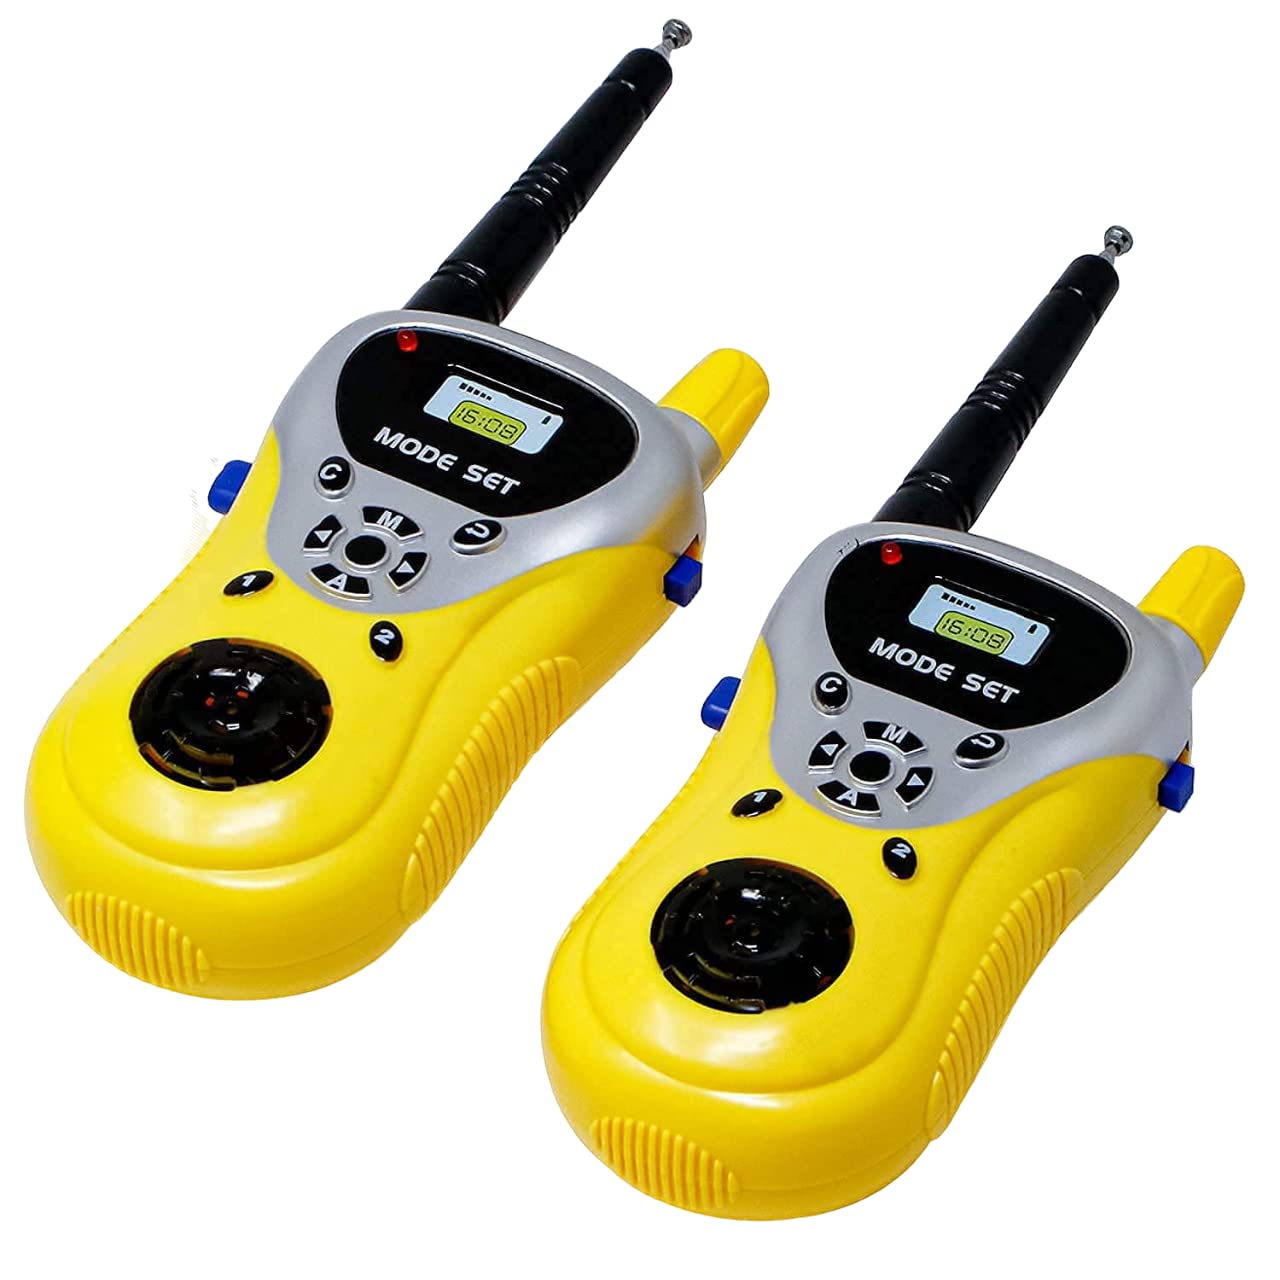 MM TOYS Walkie Talkie Toy Set 2 Pcs- Antenna Operated 2-Way Radio Role Play, Long Range for Boys & Girls